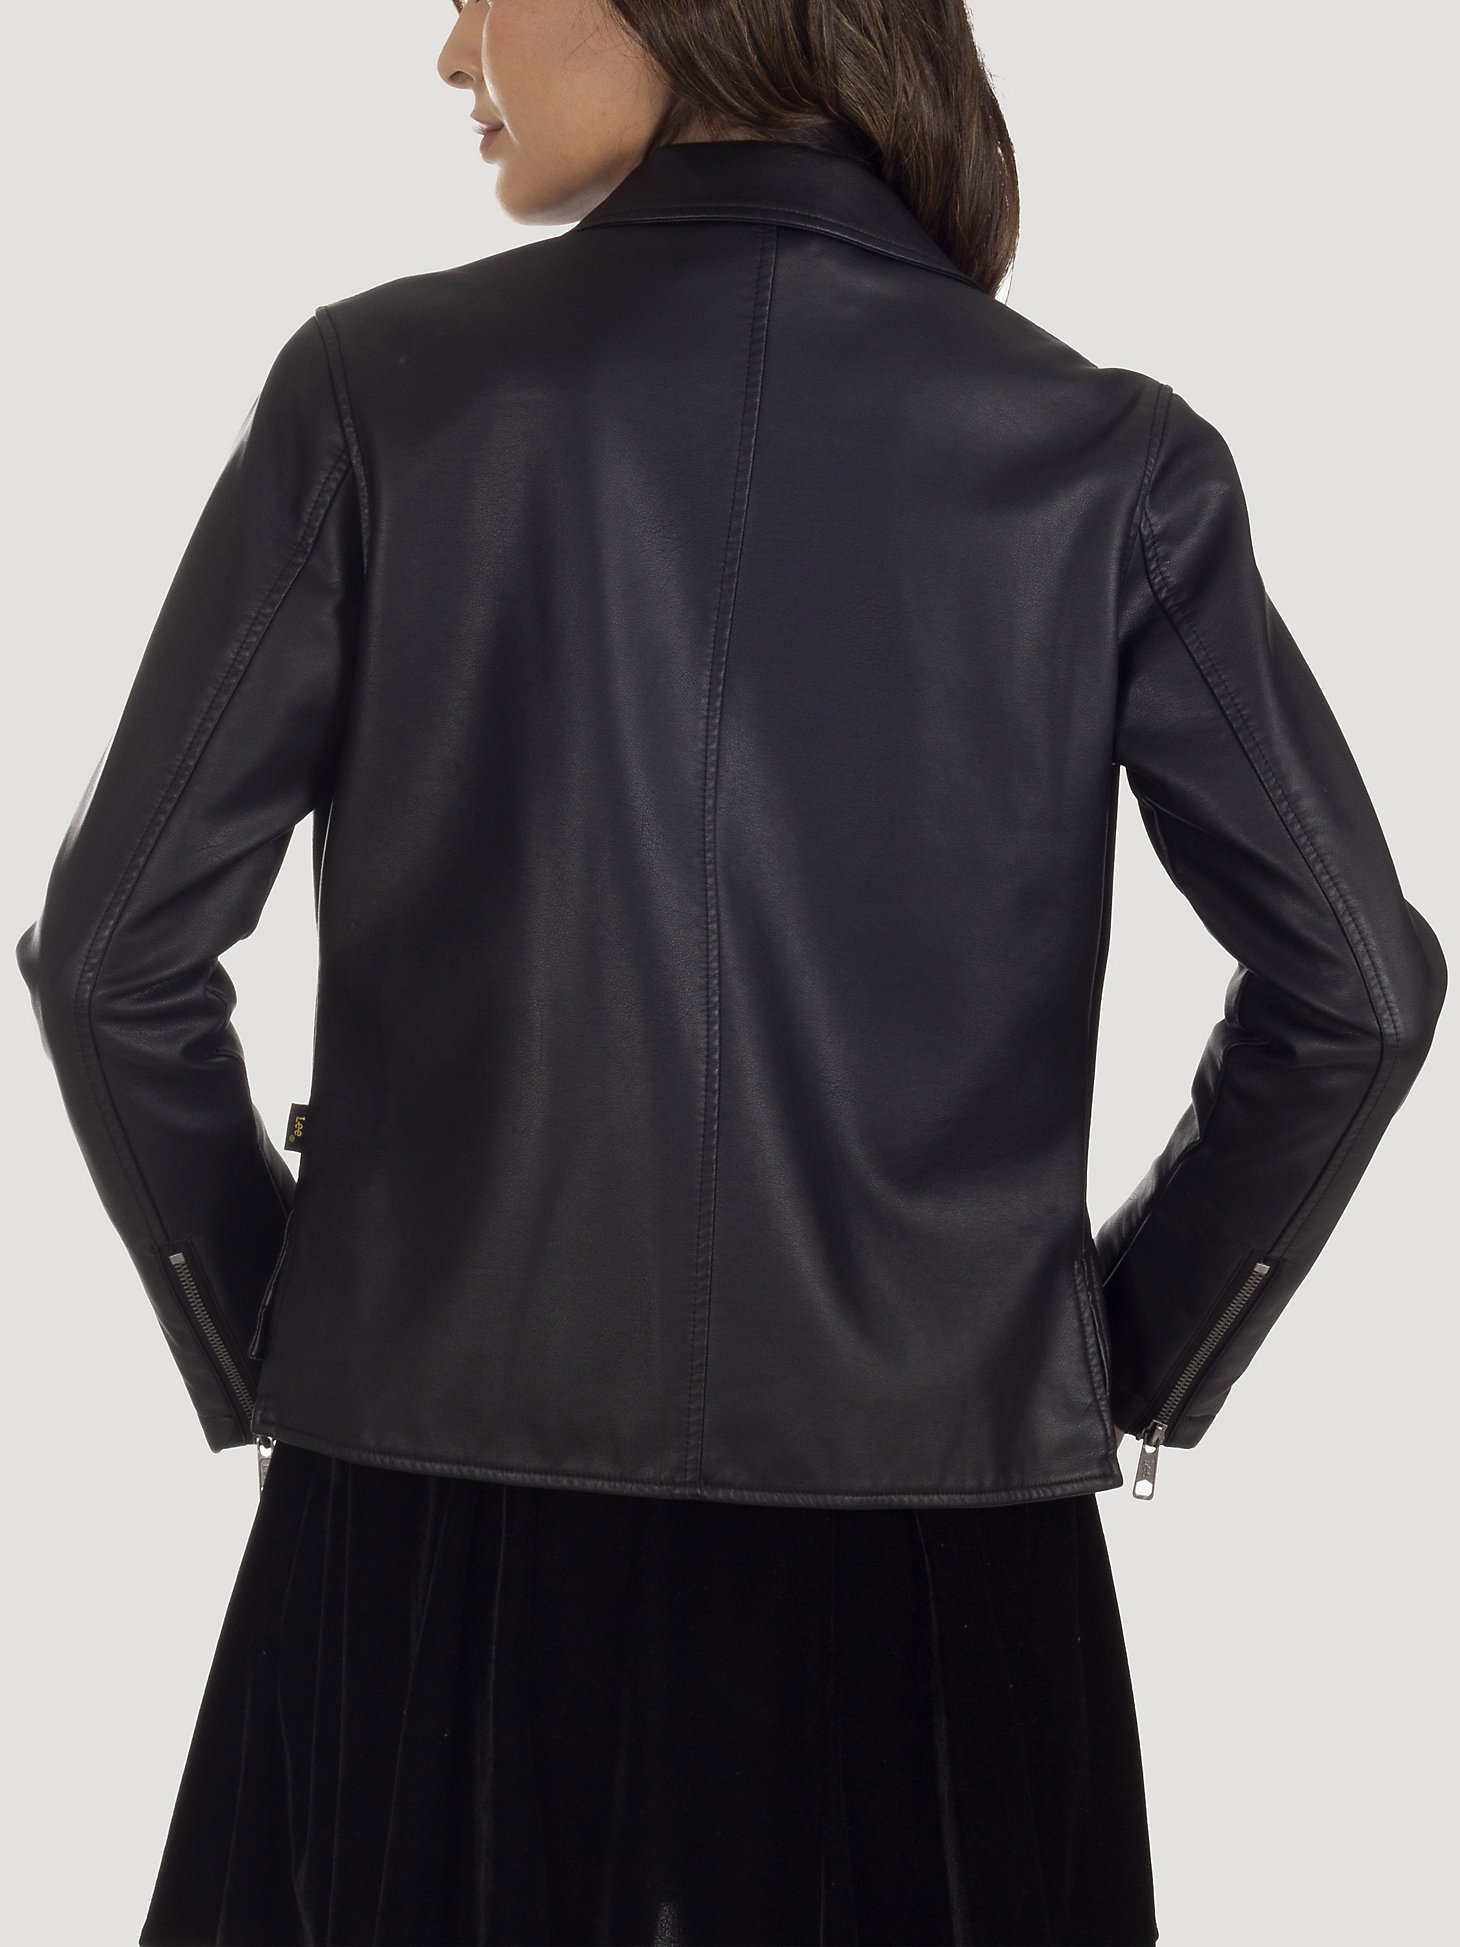 Women's Classic Zip Up Faux Leather Jacket in Black alternative view 1